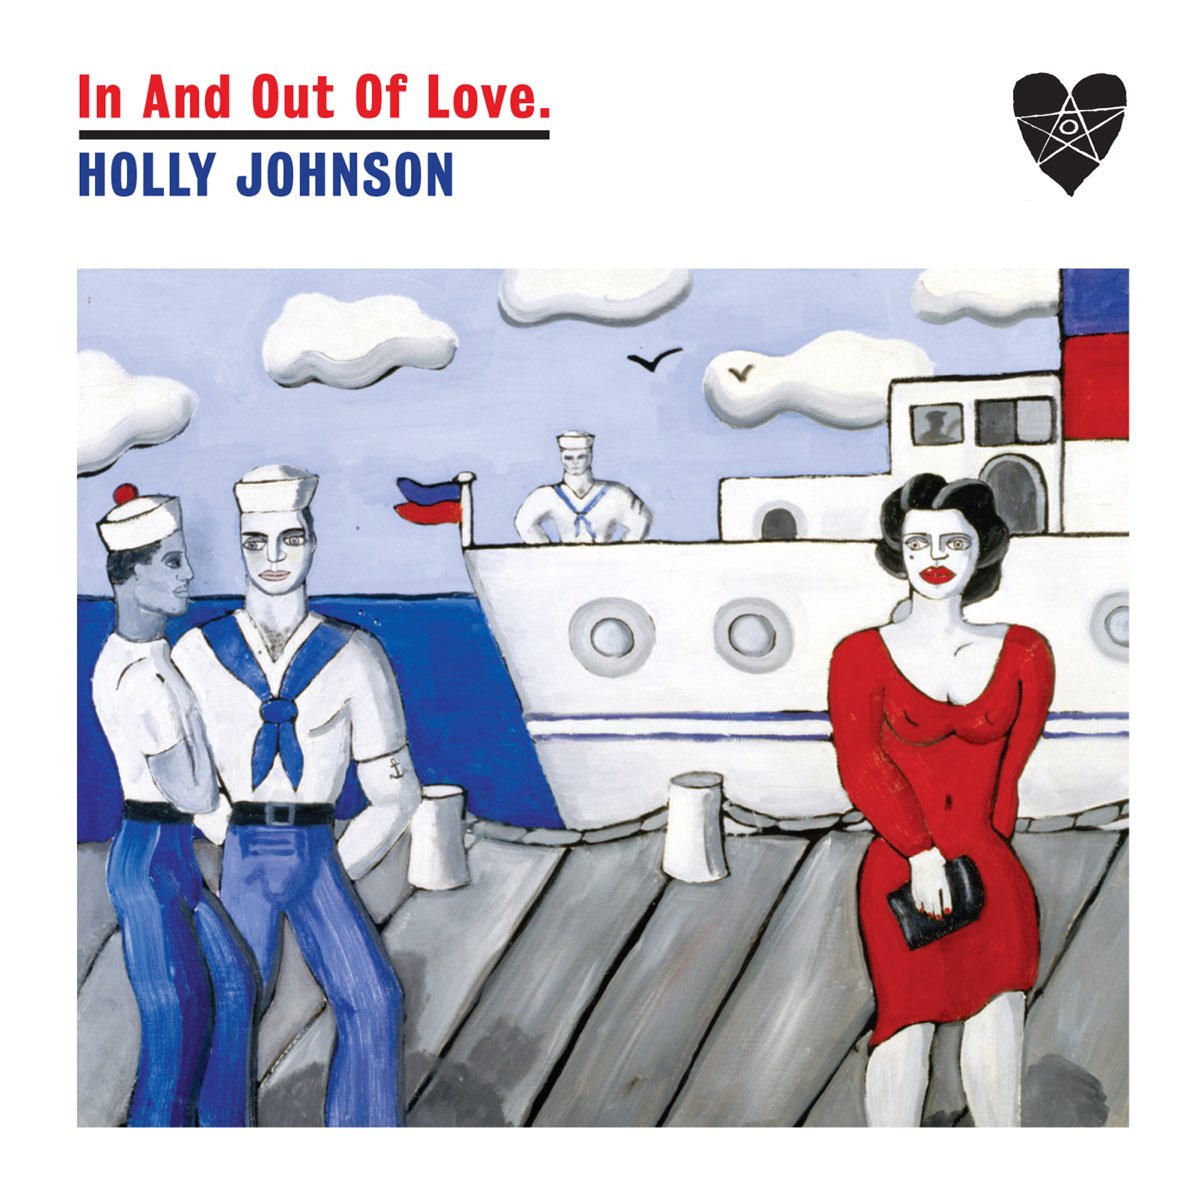 In and out of love remix. Out of Love. Ln and out of Love. Johnson, Holly: Blast. In.